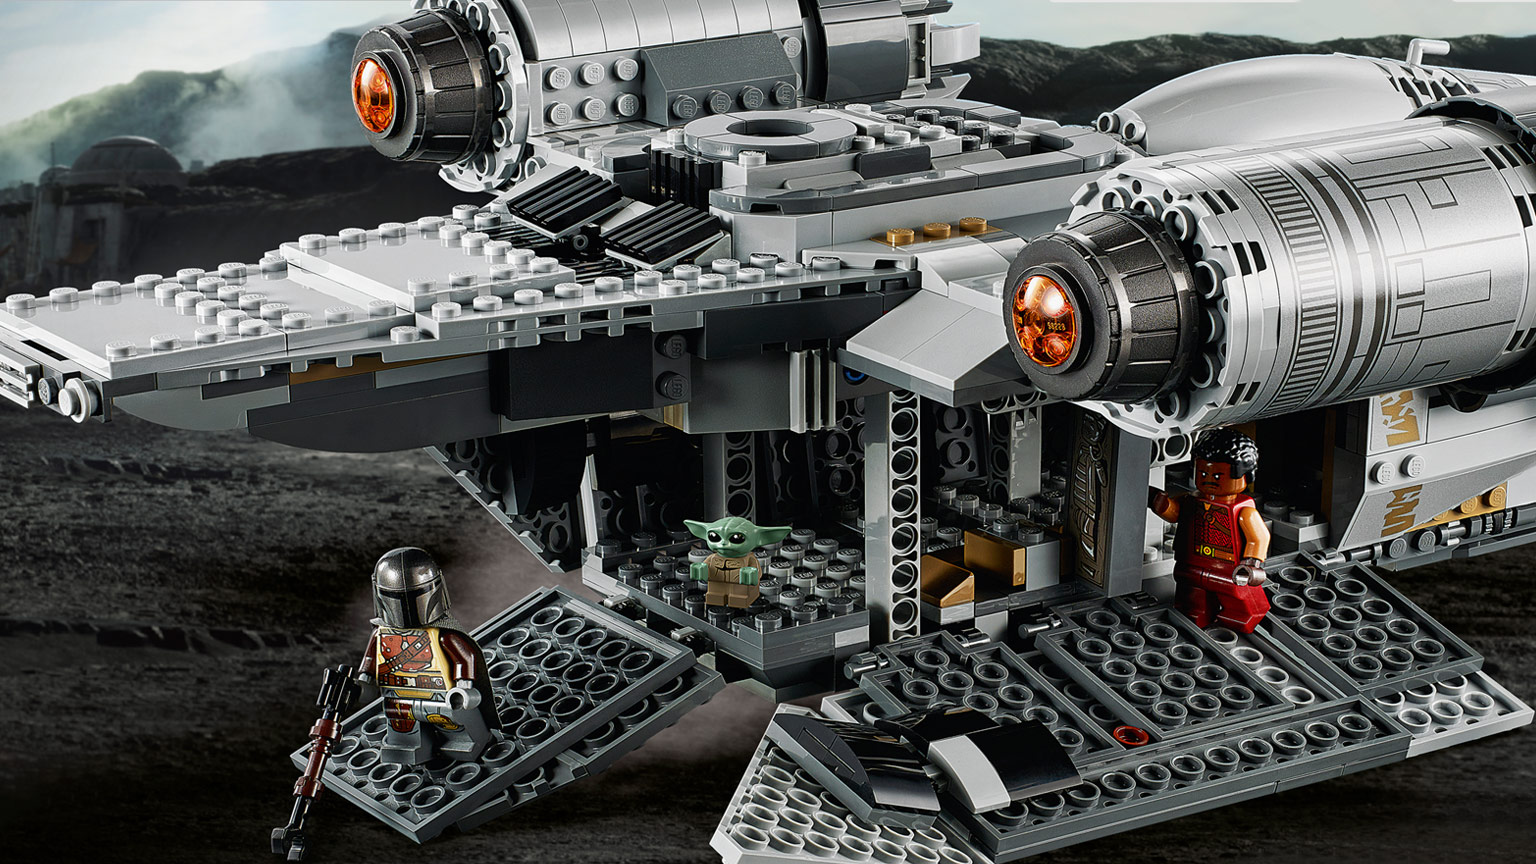 New Star Wars LEGO Sets Feature The Skywalker Saga, The Mandalorian, and More!